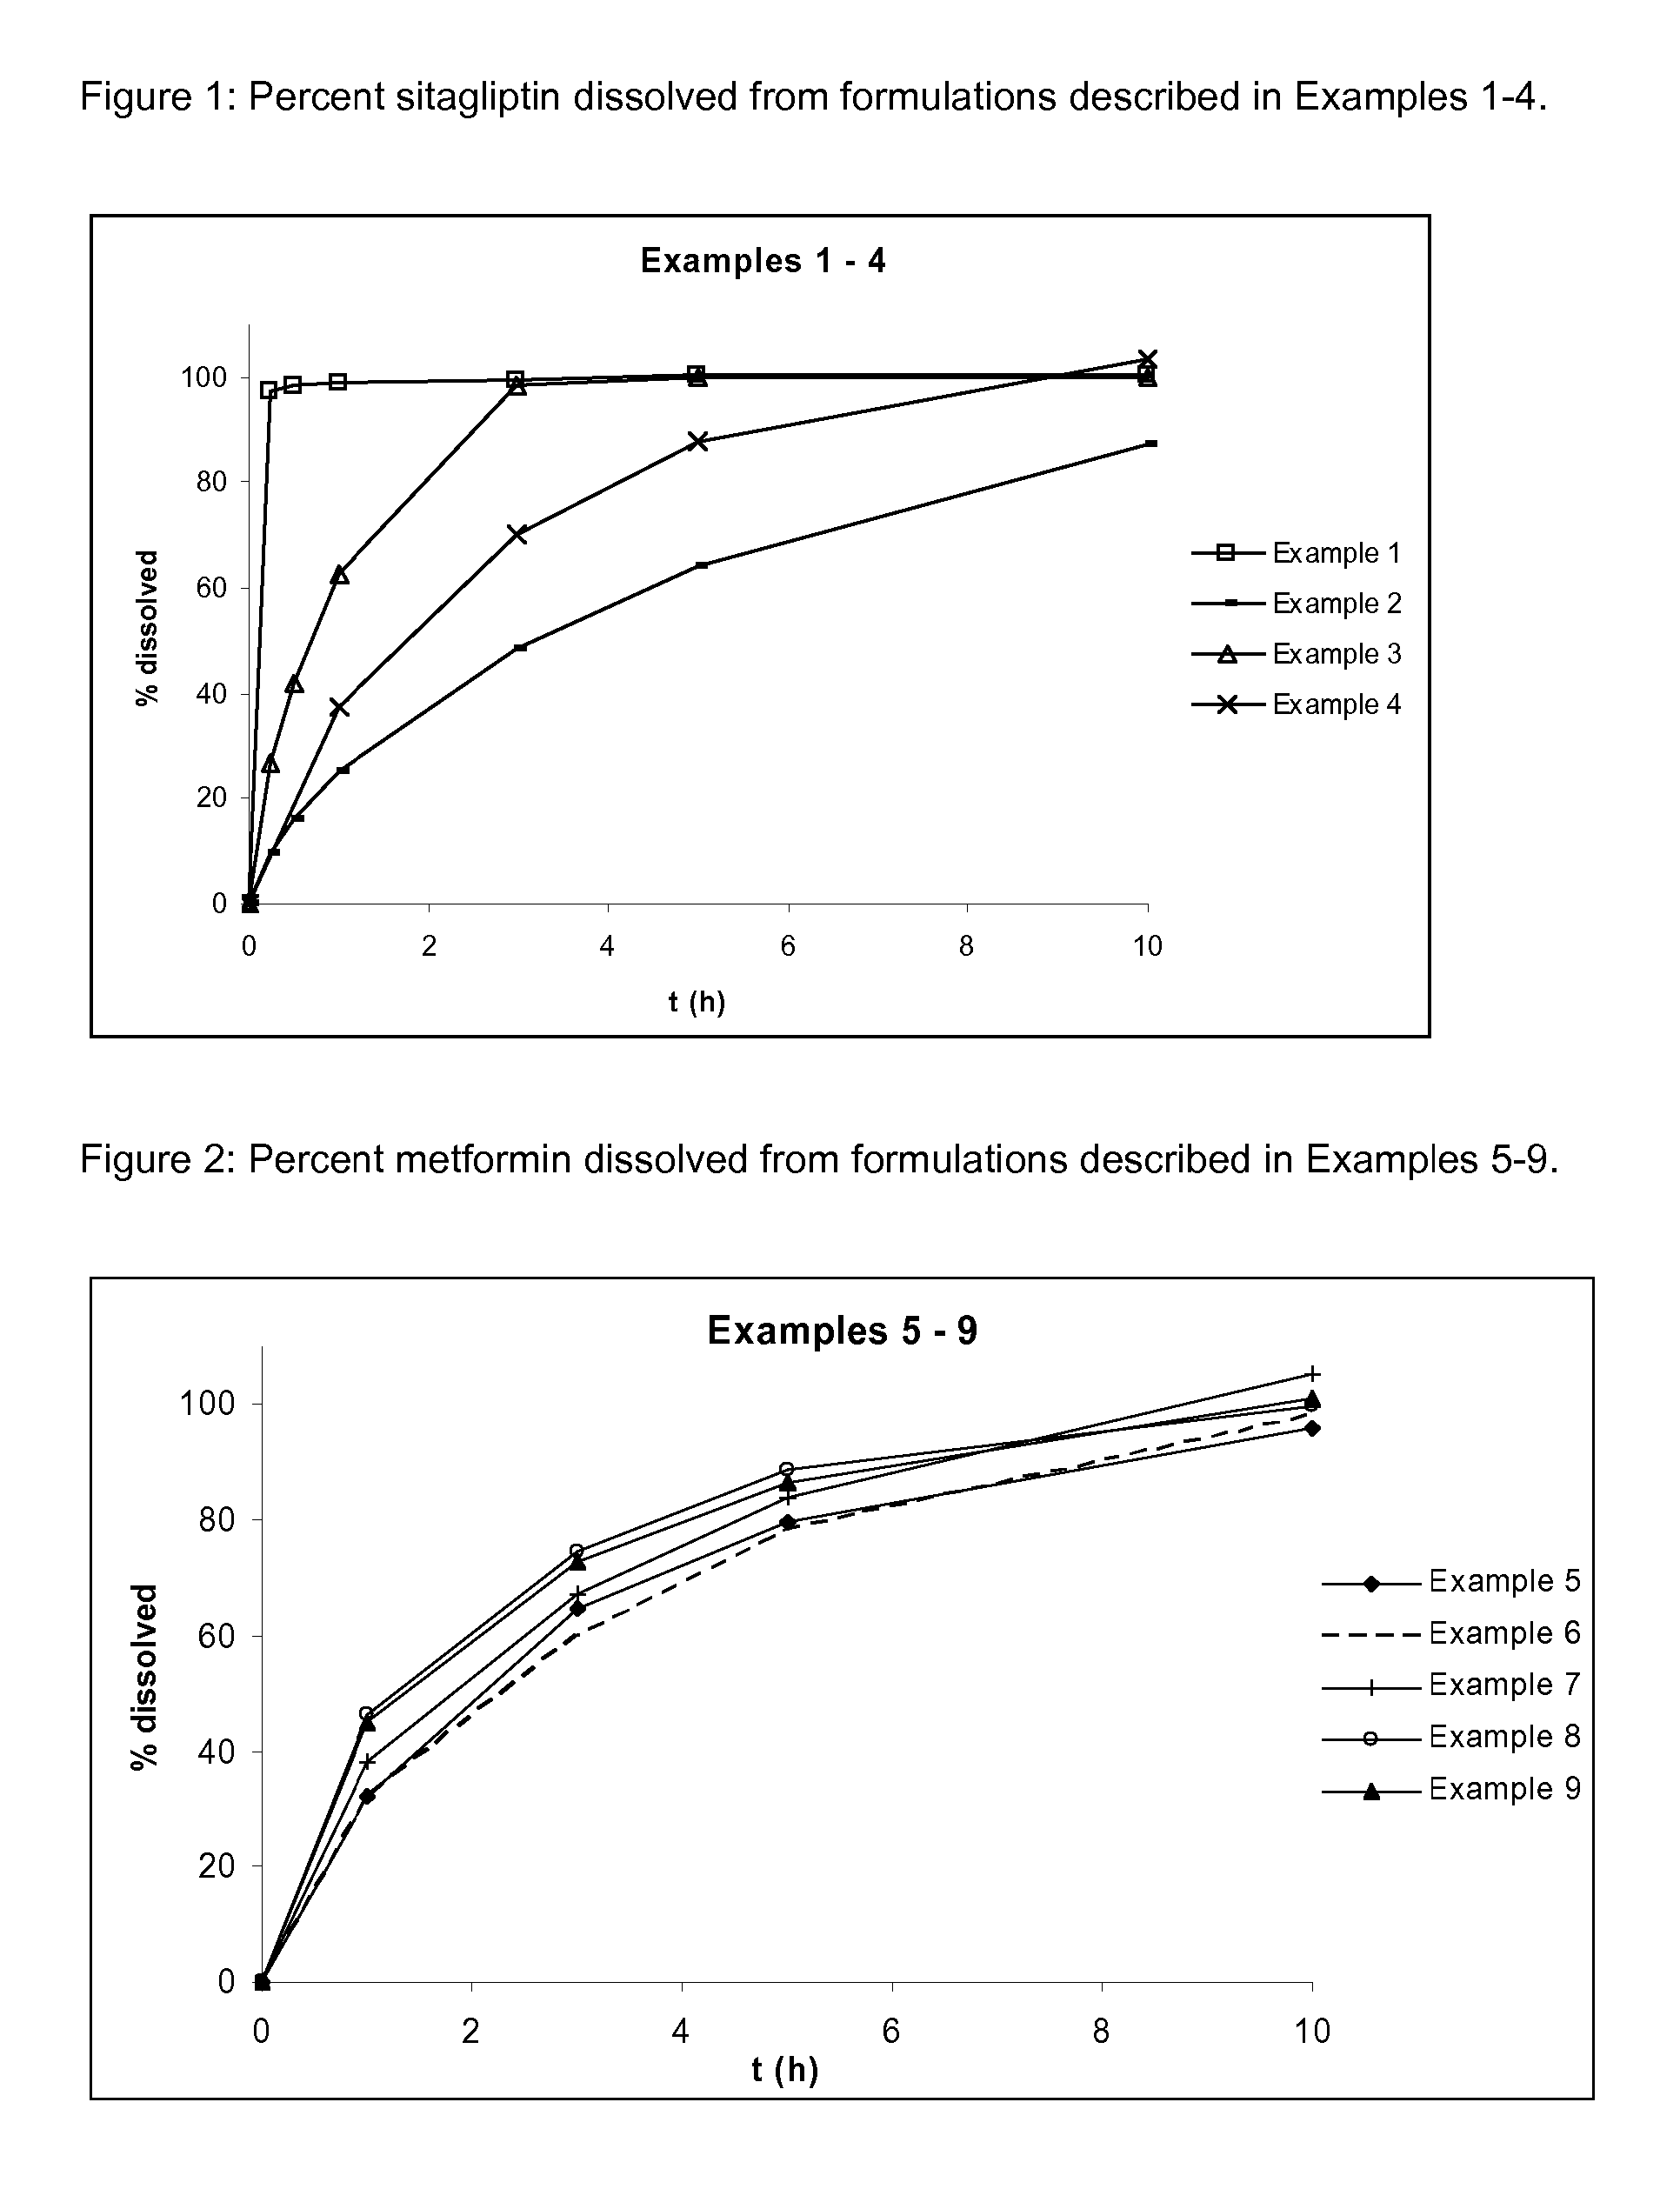 Pharmaceutical compositions comprising a combination of metformin and sitagliptin